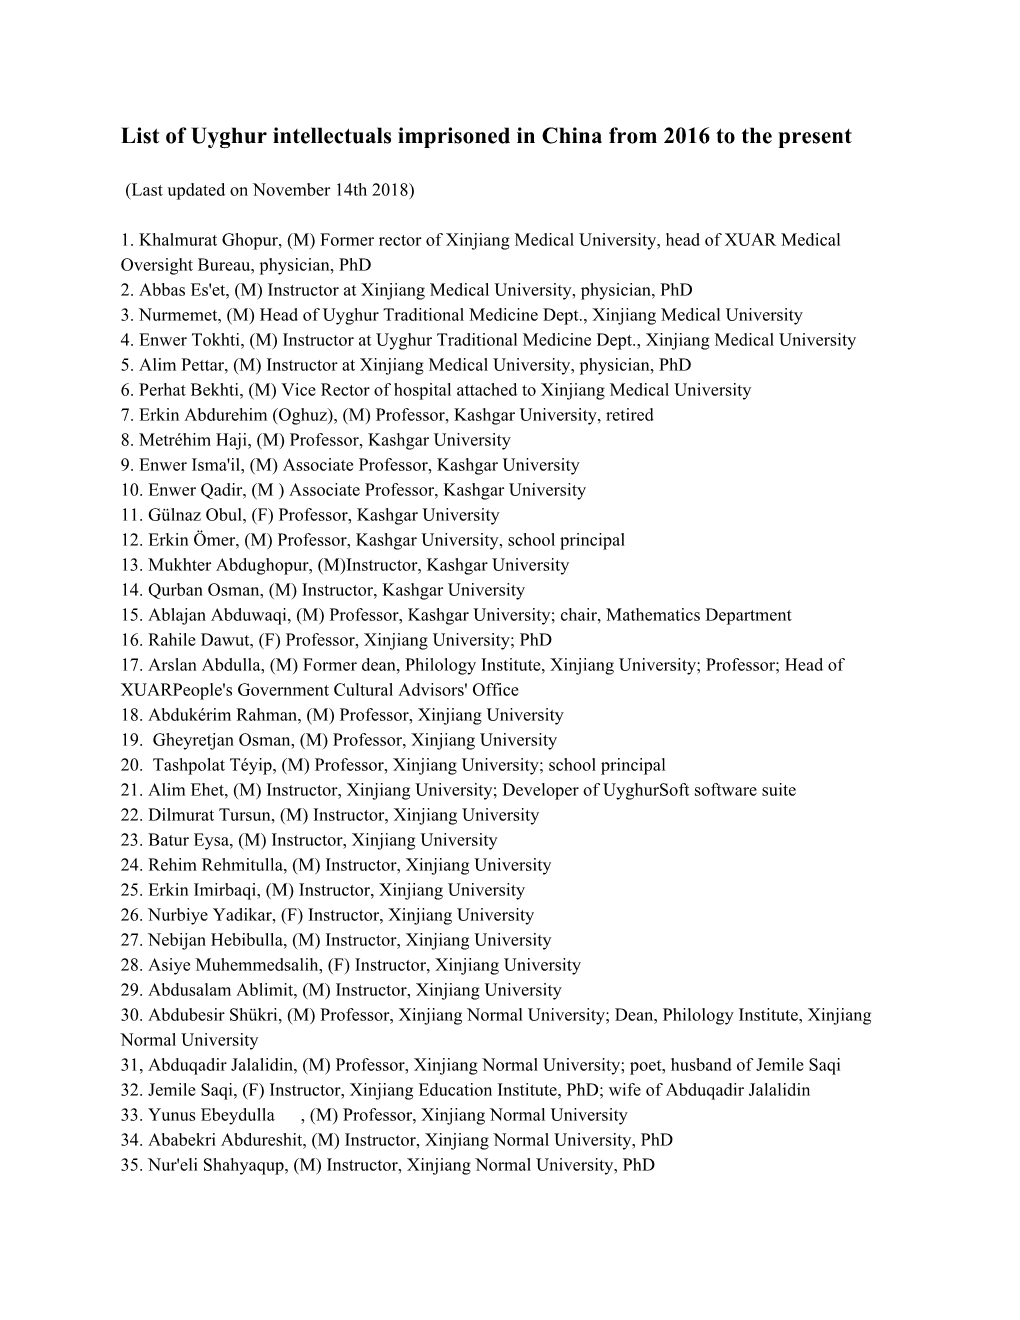 List of Uyghur Intellectuals Imprisoned in China from 2016 to the Present